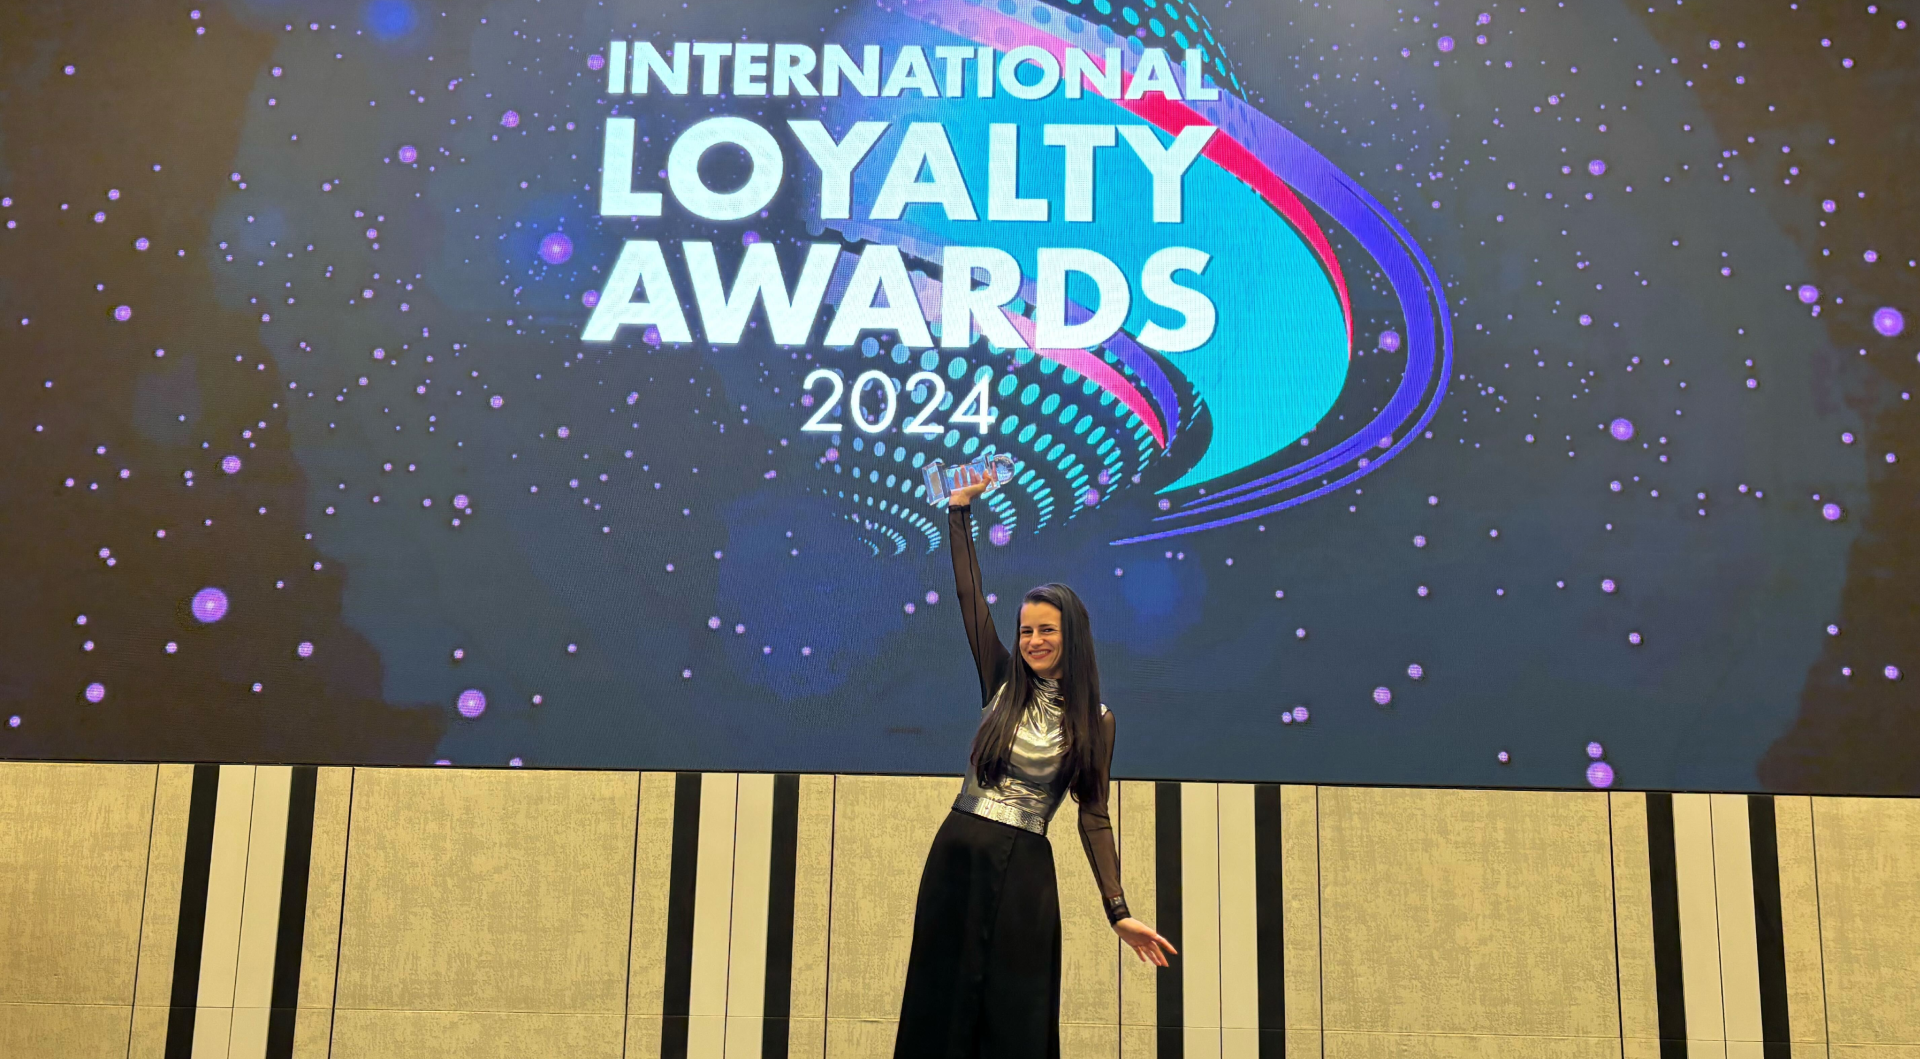 Image for Antavo’s news article on Zsuzsa Kecsmar winning this year’s Personality of the Year at the International Loyalty Awards.